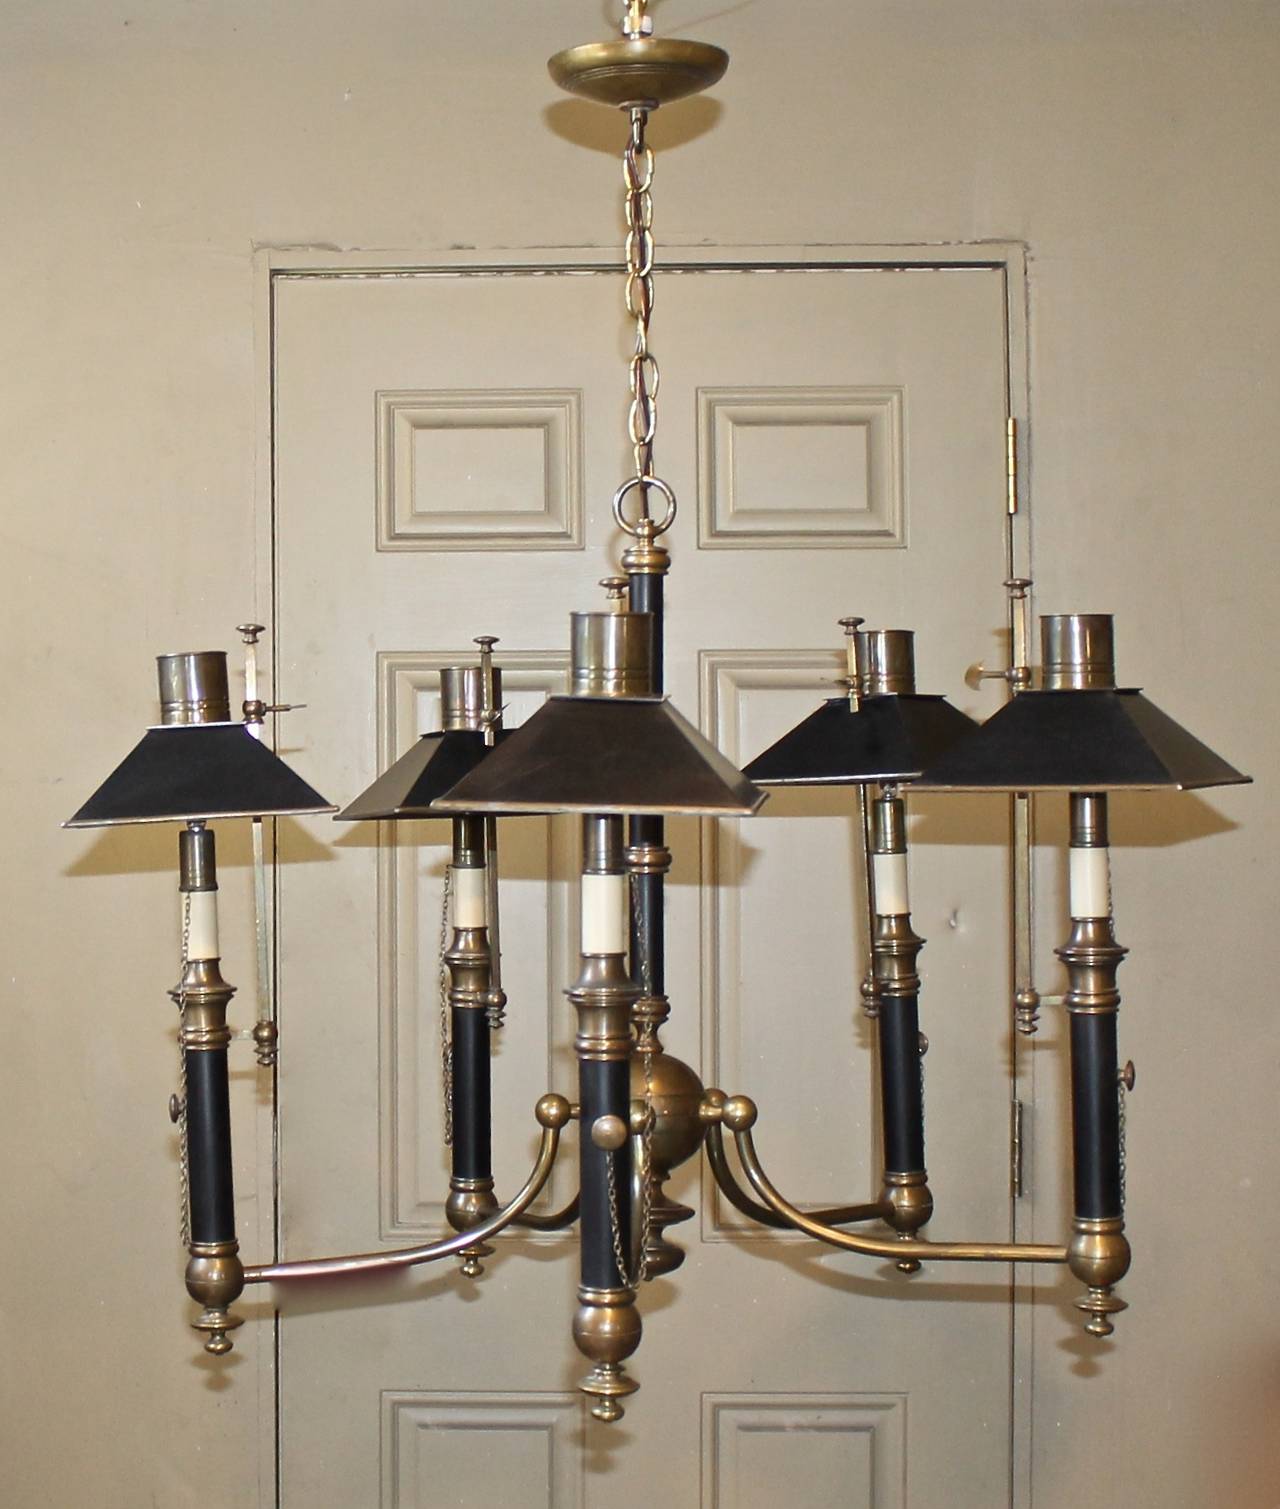 Brass and black painted Regency style chandelier by Chapman Lighting with 5 arms fitted with adjustable shades and decorative hanging chain and 